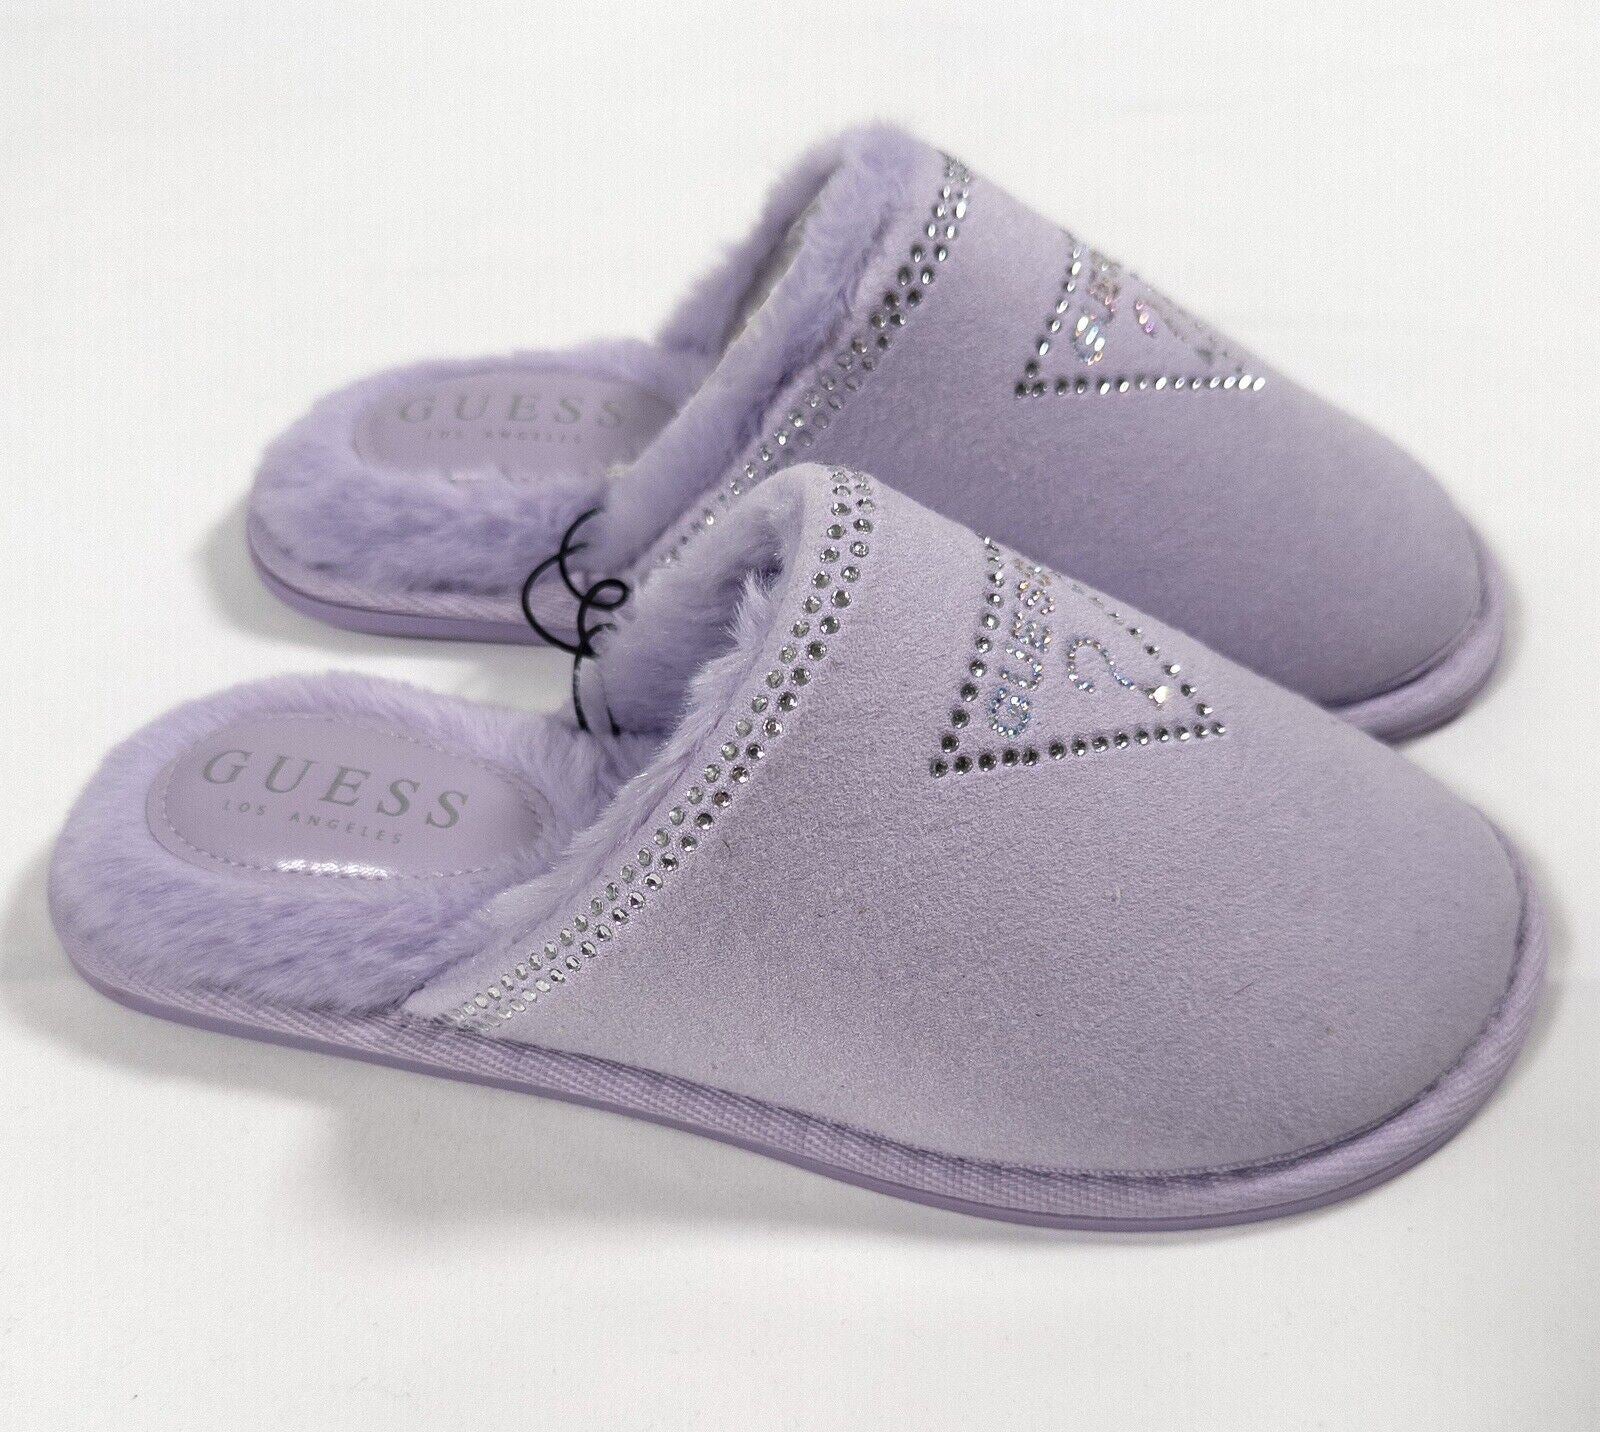 Guess Women's Slippers Lilac Slip On Slippers Fluffy Size UK 7